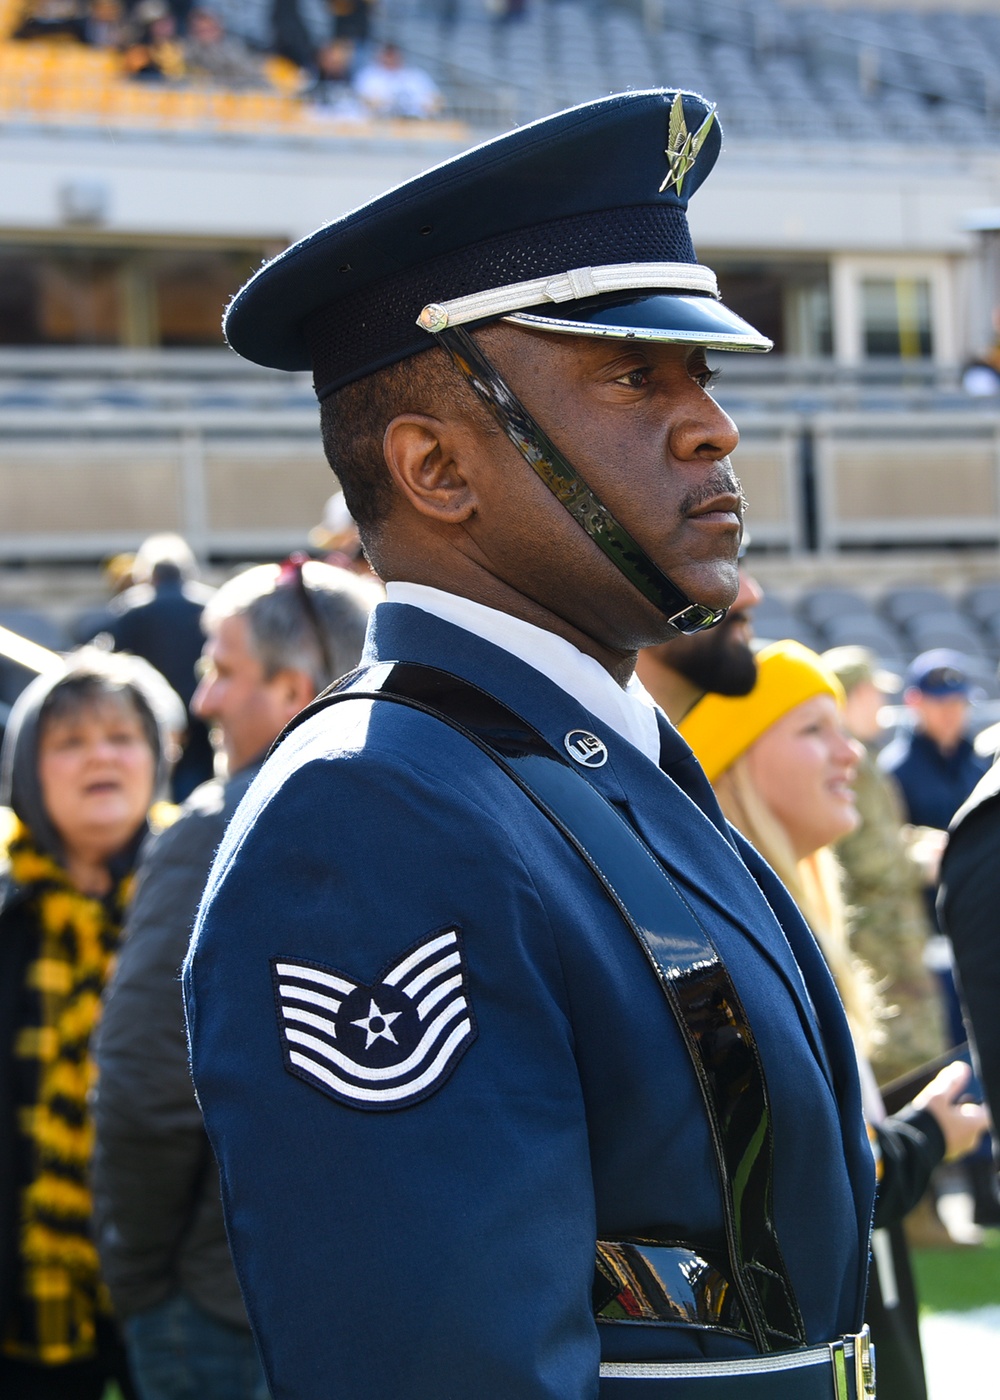 DVIDS Images Pittsburgh Steelers Salute to Service [Image 1 of 8]